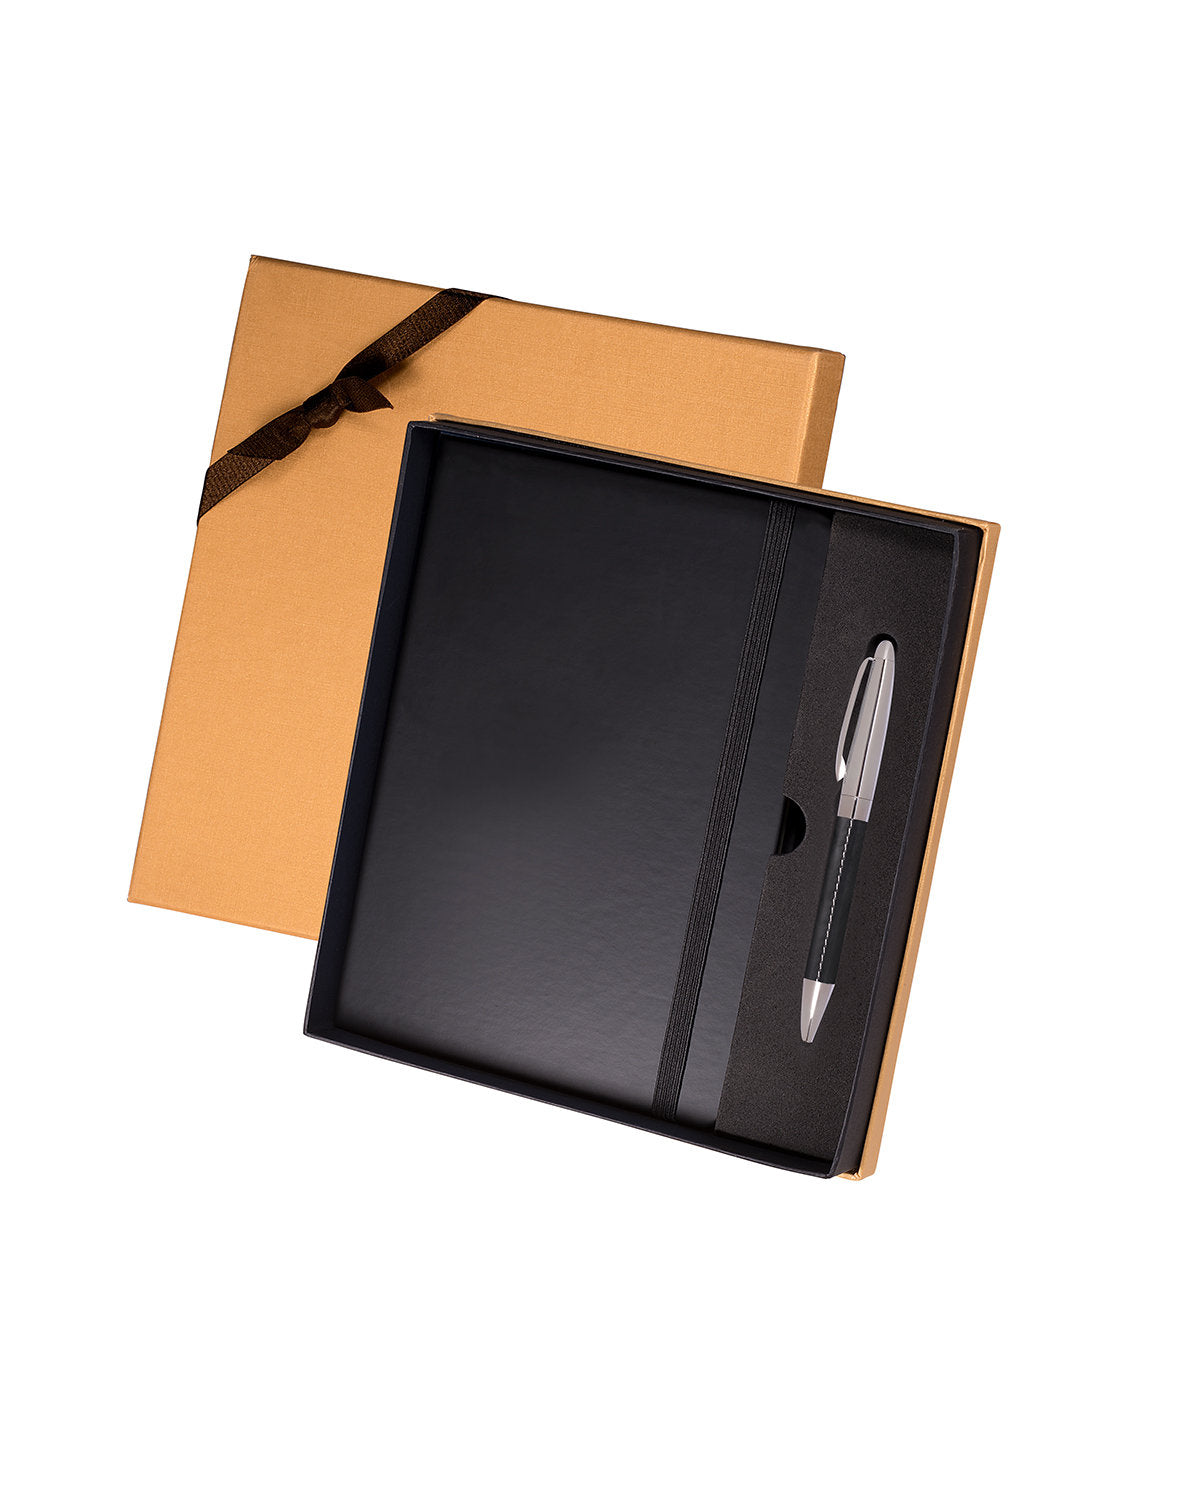 # Journal And Pen Gift Set